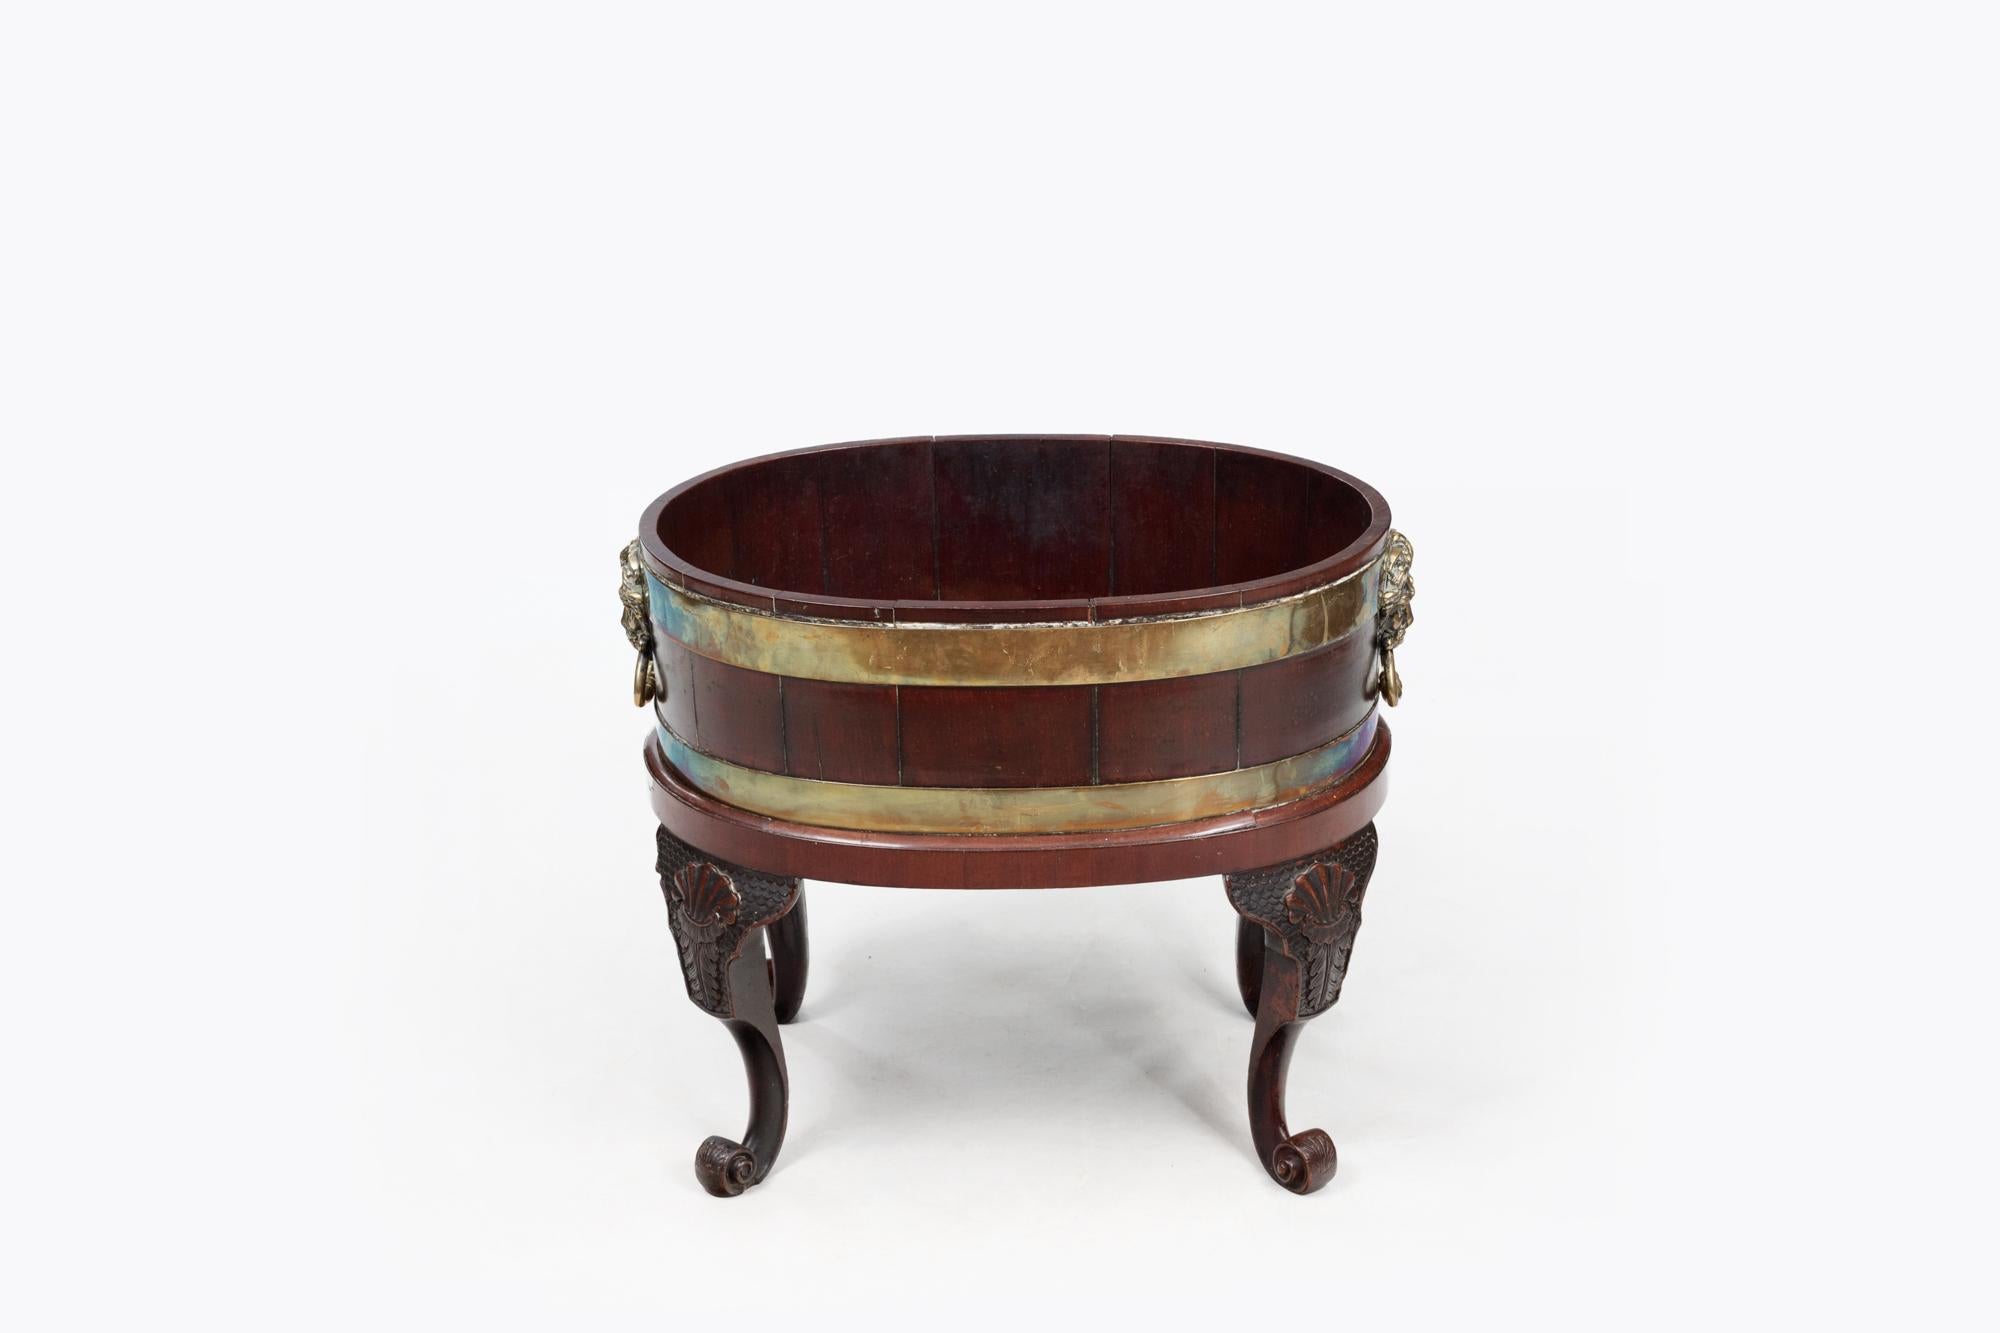 18th Century Irish mahogany oval brass-bound jardiniere with lion mask handles. The planter sits on four cabriole legs featuring carved shell design to the knees and terminating on scroll feet.